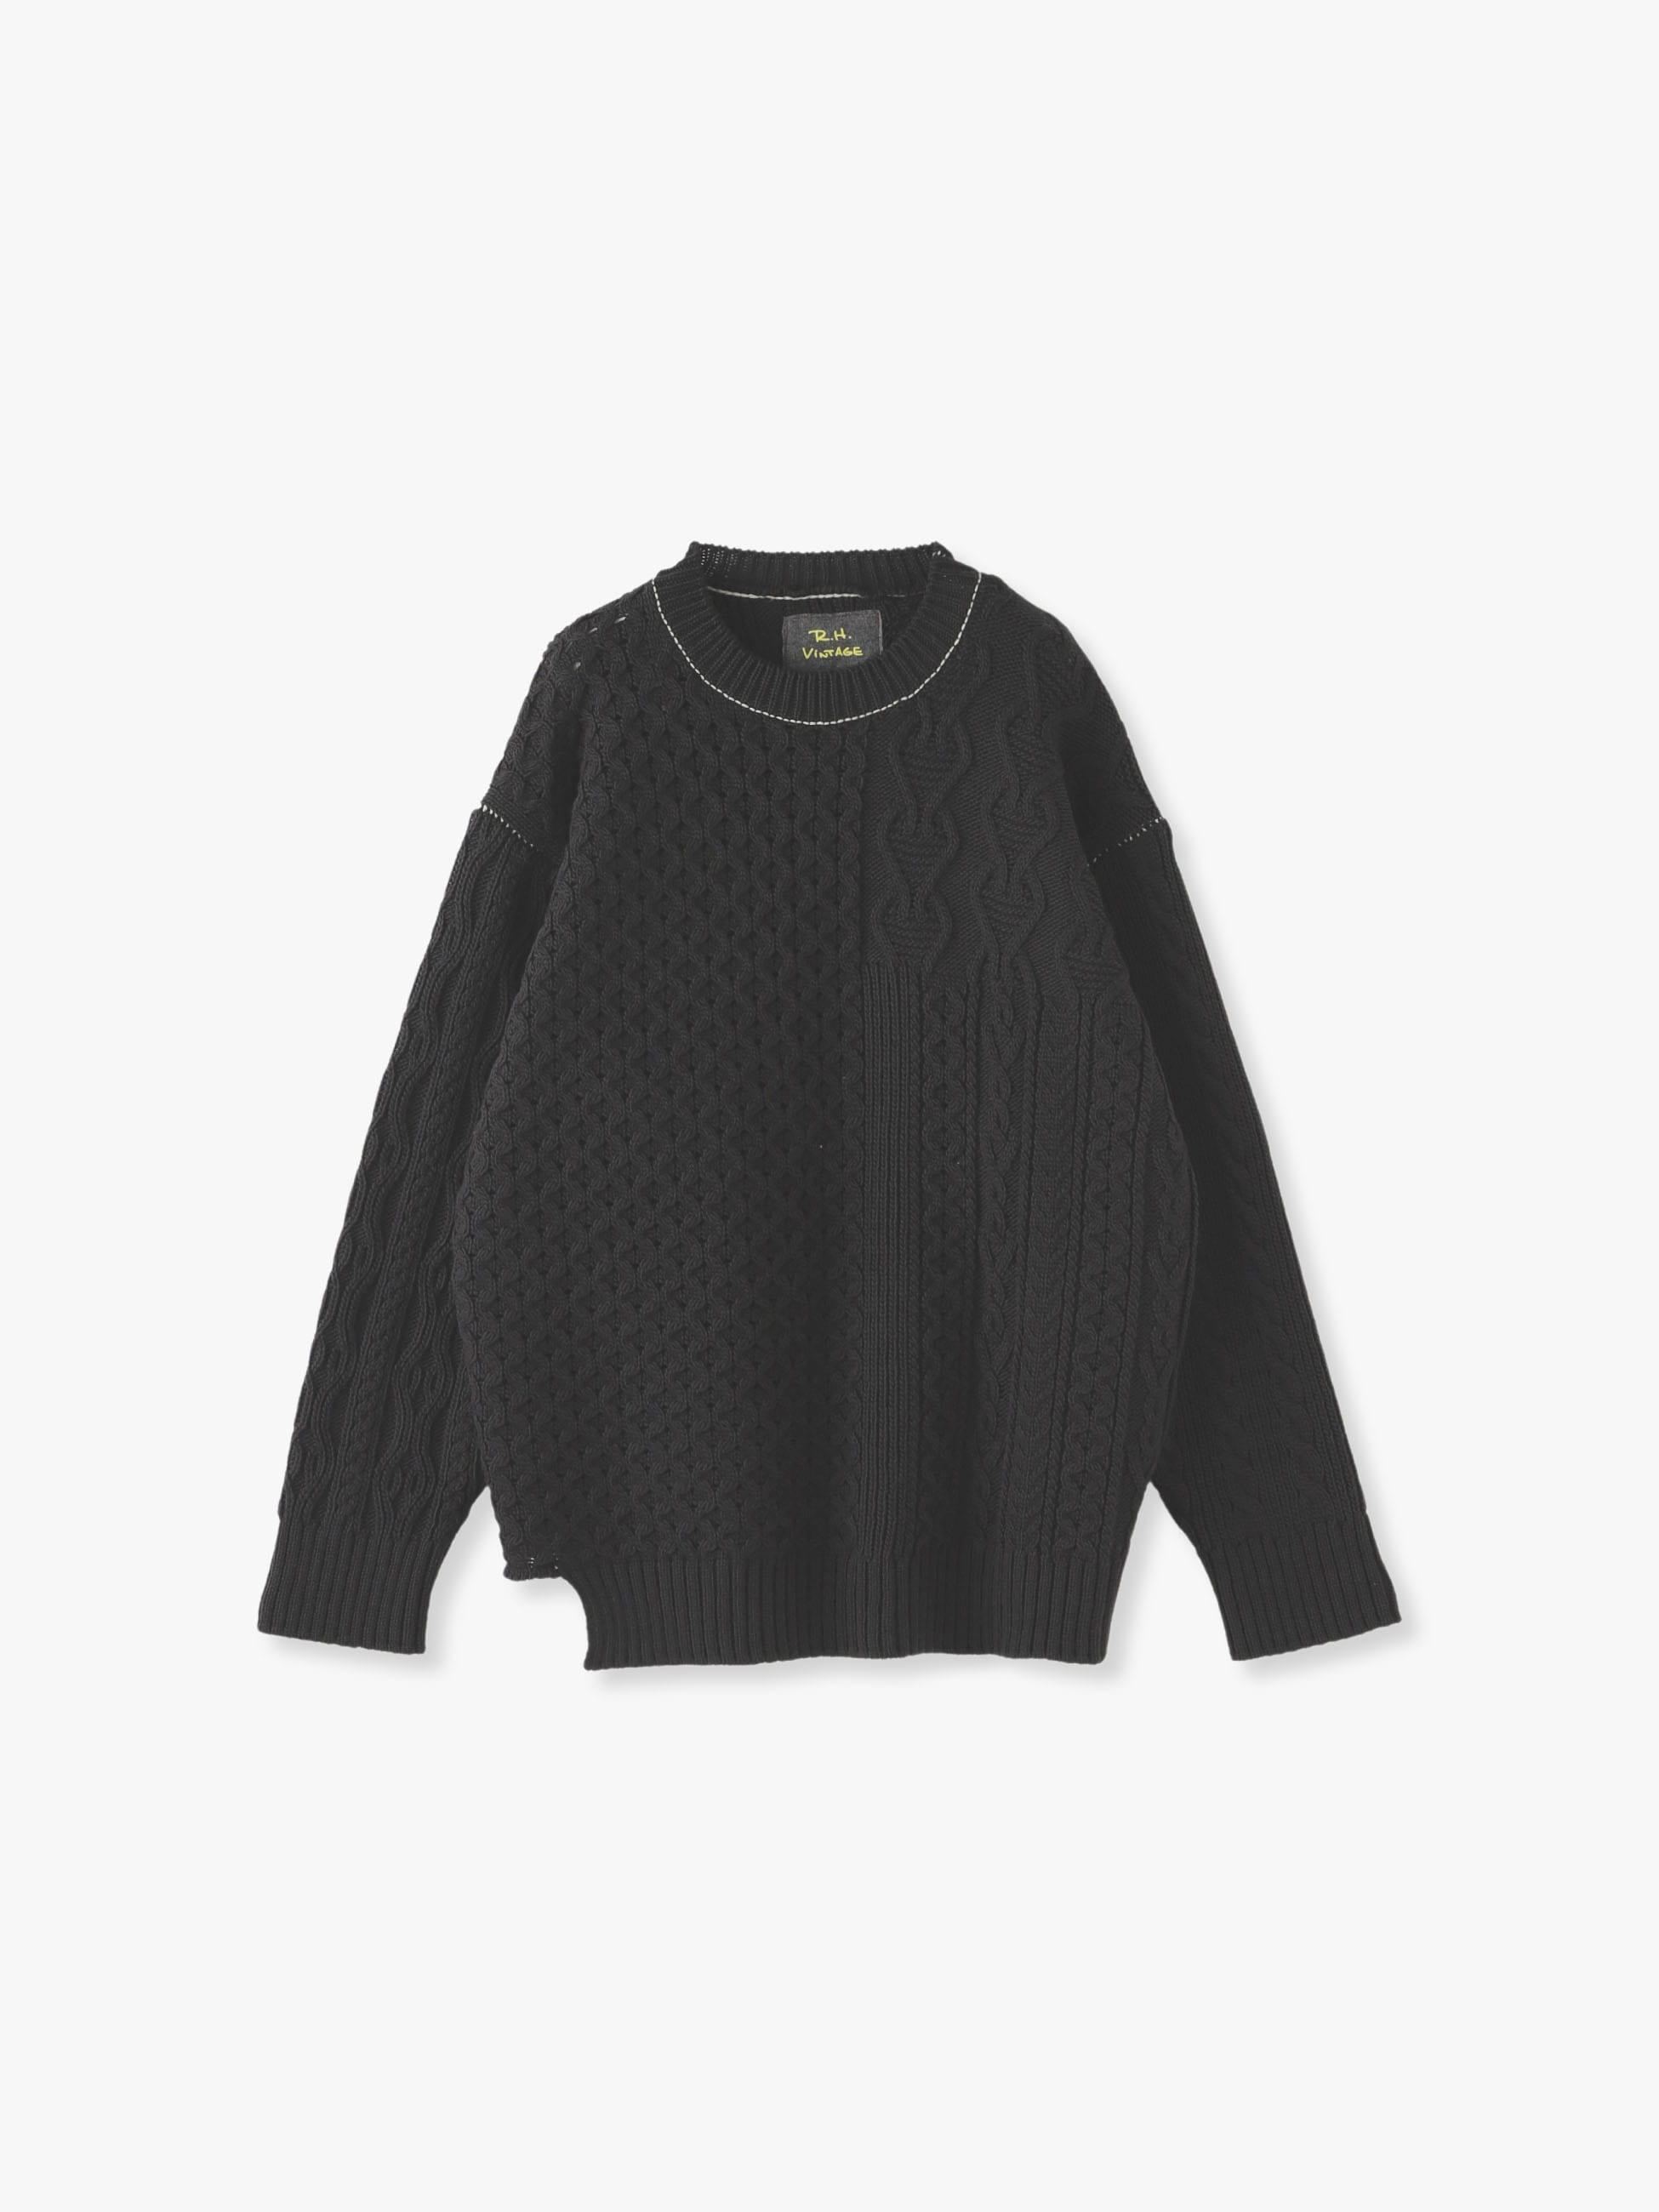 Mix Cable Knit Pullover｜RH Vintage(アールエイチ ヴィンテージ ...